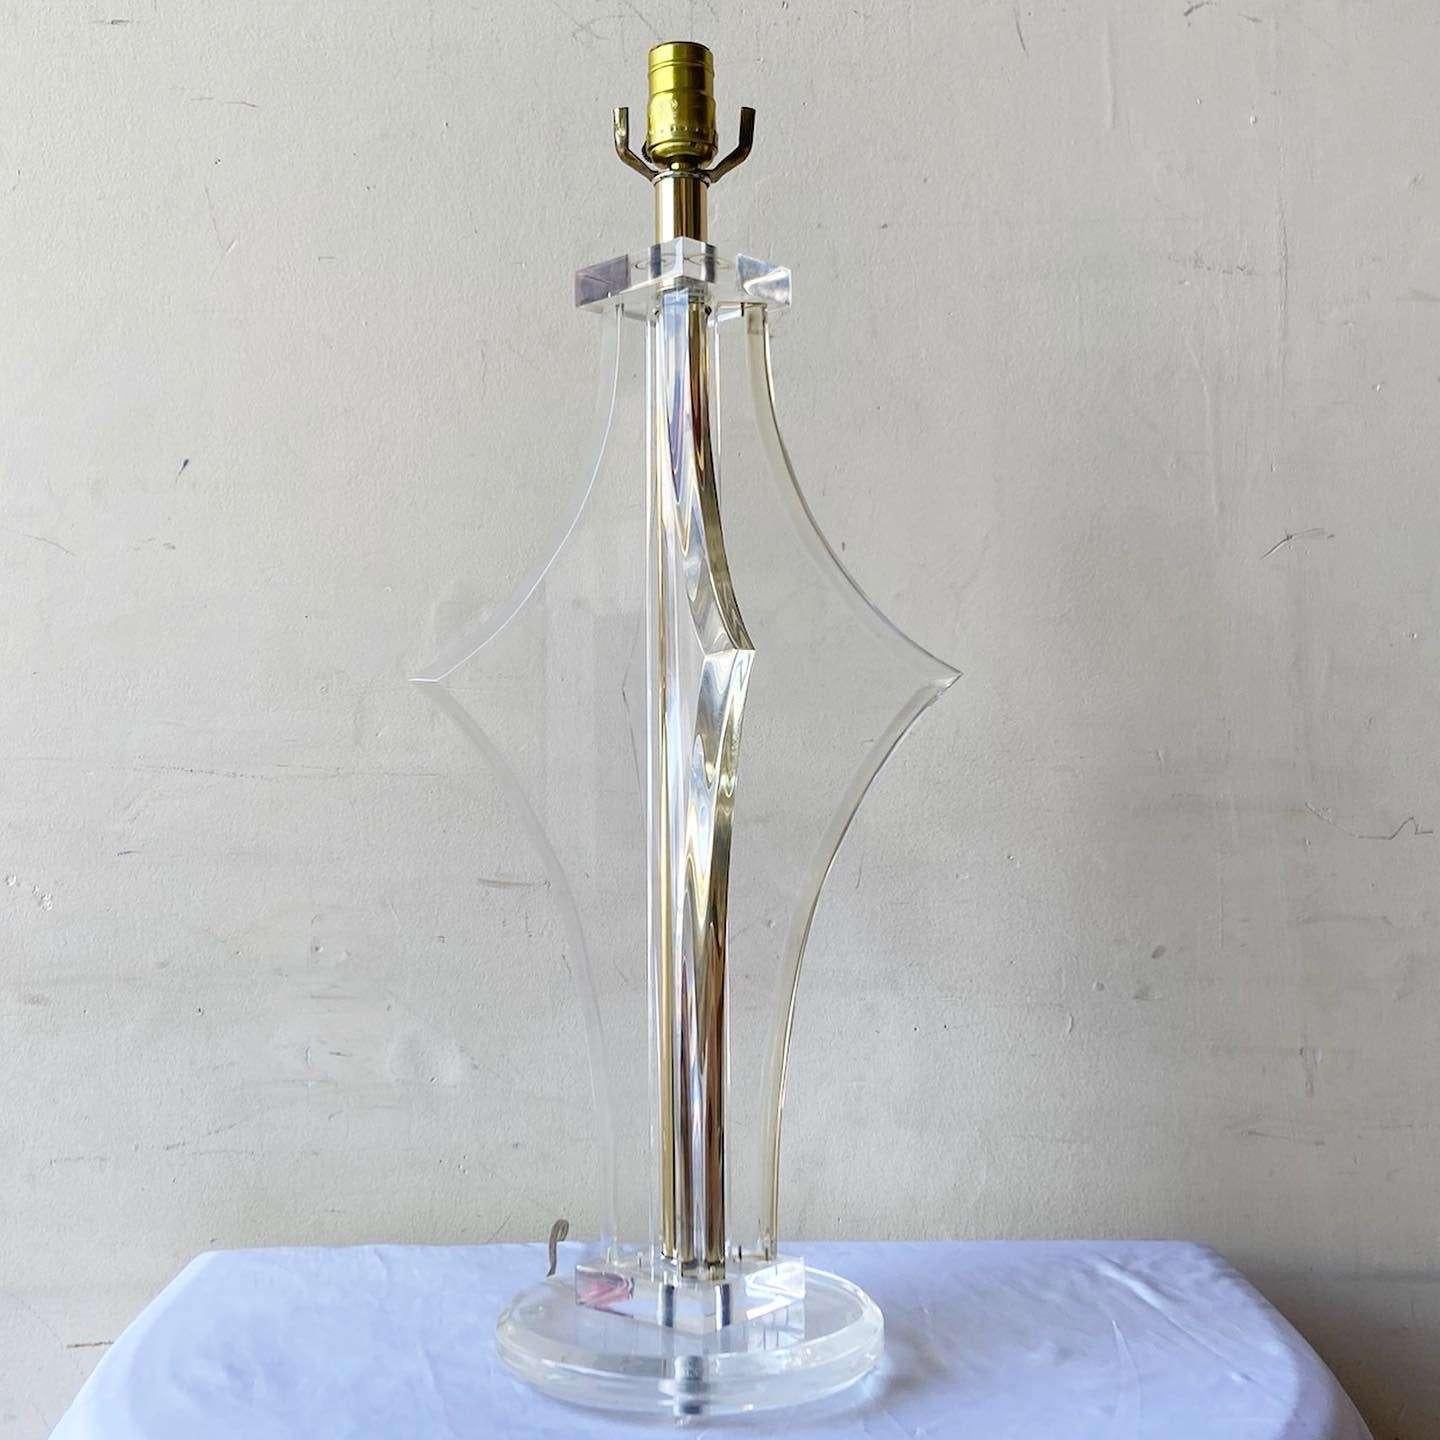 Amazing mid century modern lucite table lamps. Features 4 sculpted panels.

3 way lighting
